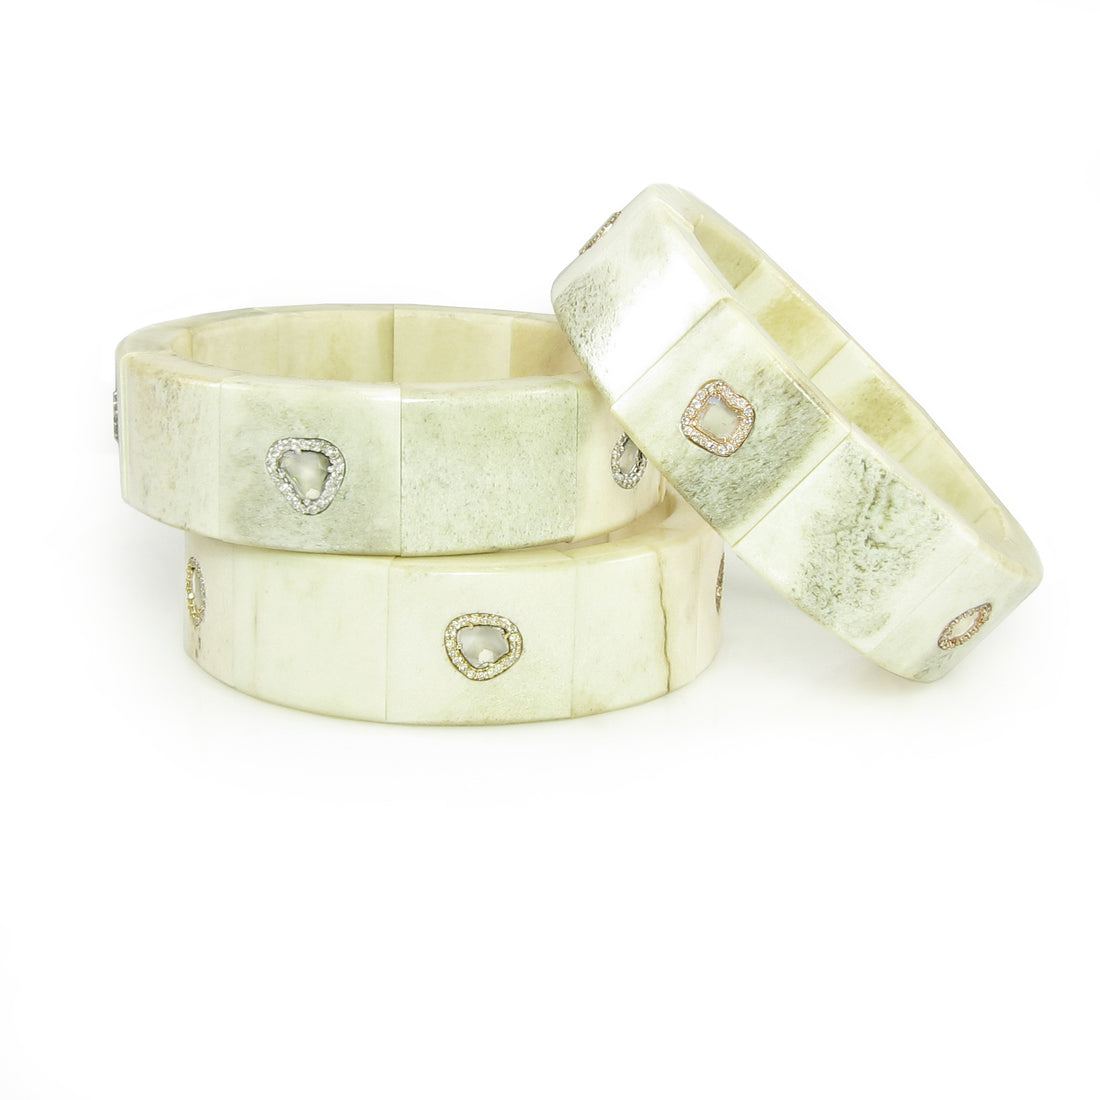 A beautiful mix of organic and fine jewelry in a stretch moose antler bracelet.